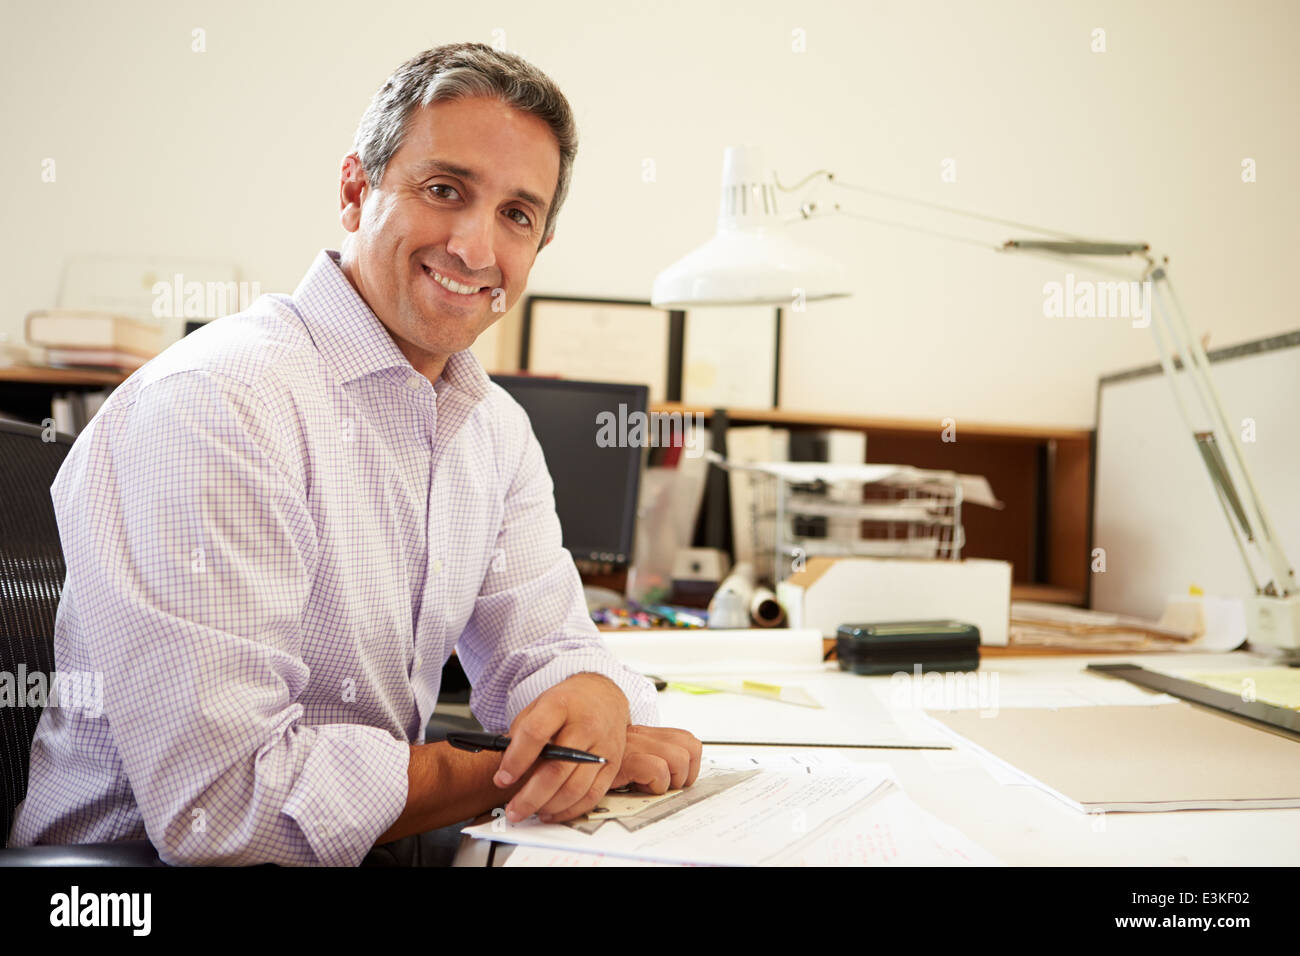 Male Architect Working At Desk In Office Stock Photo